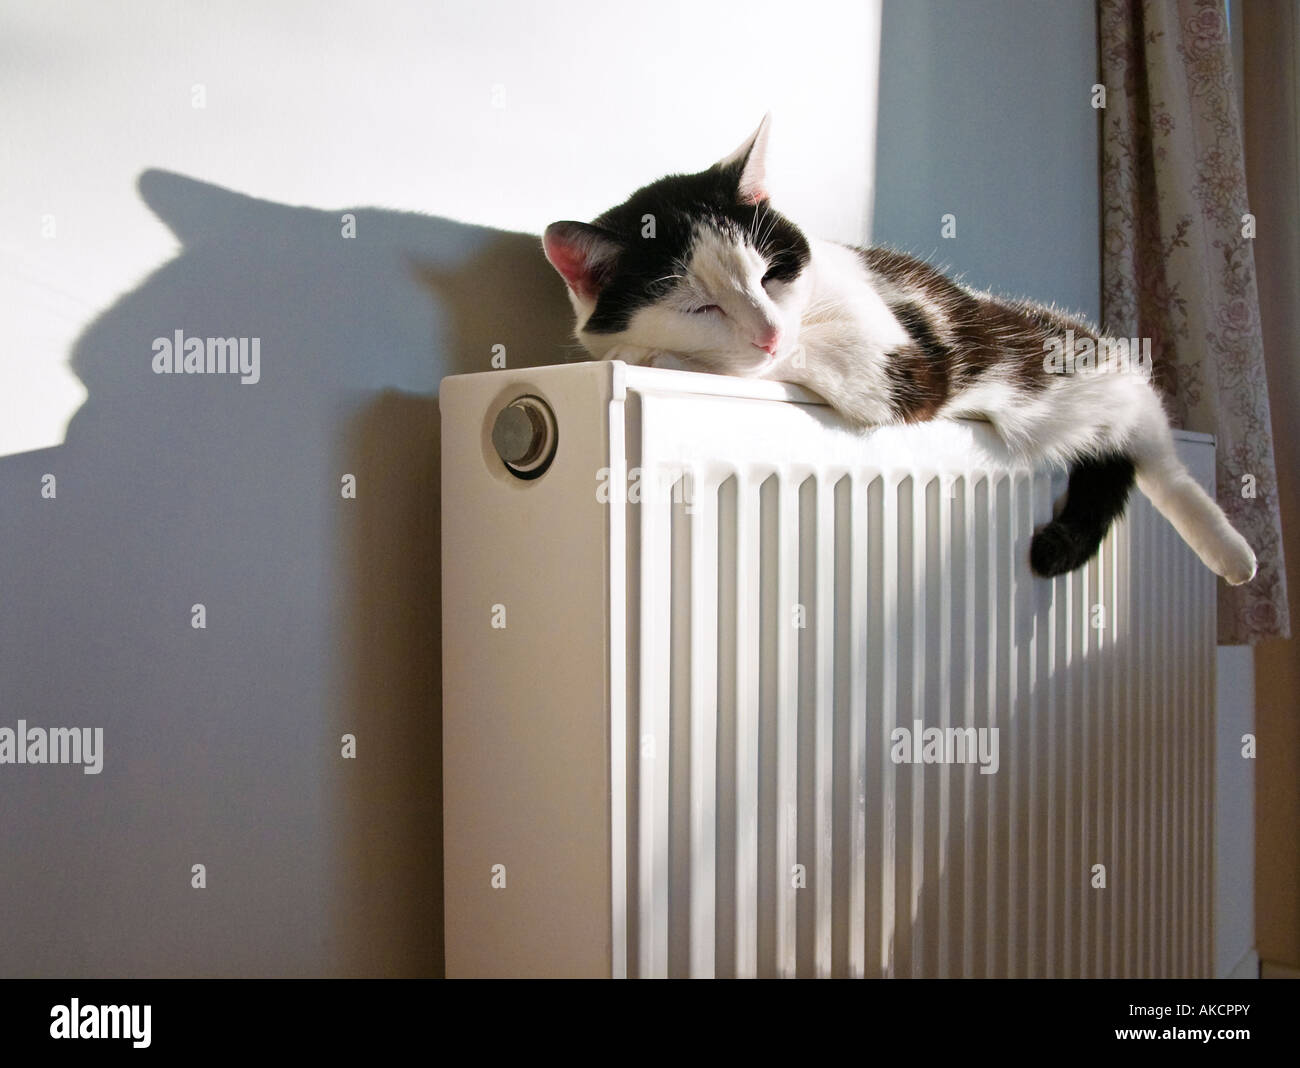 a tired black and white cross-breed domestic cat sleeping and finding warmth on a radiator Stock Photo